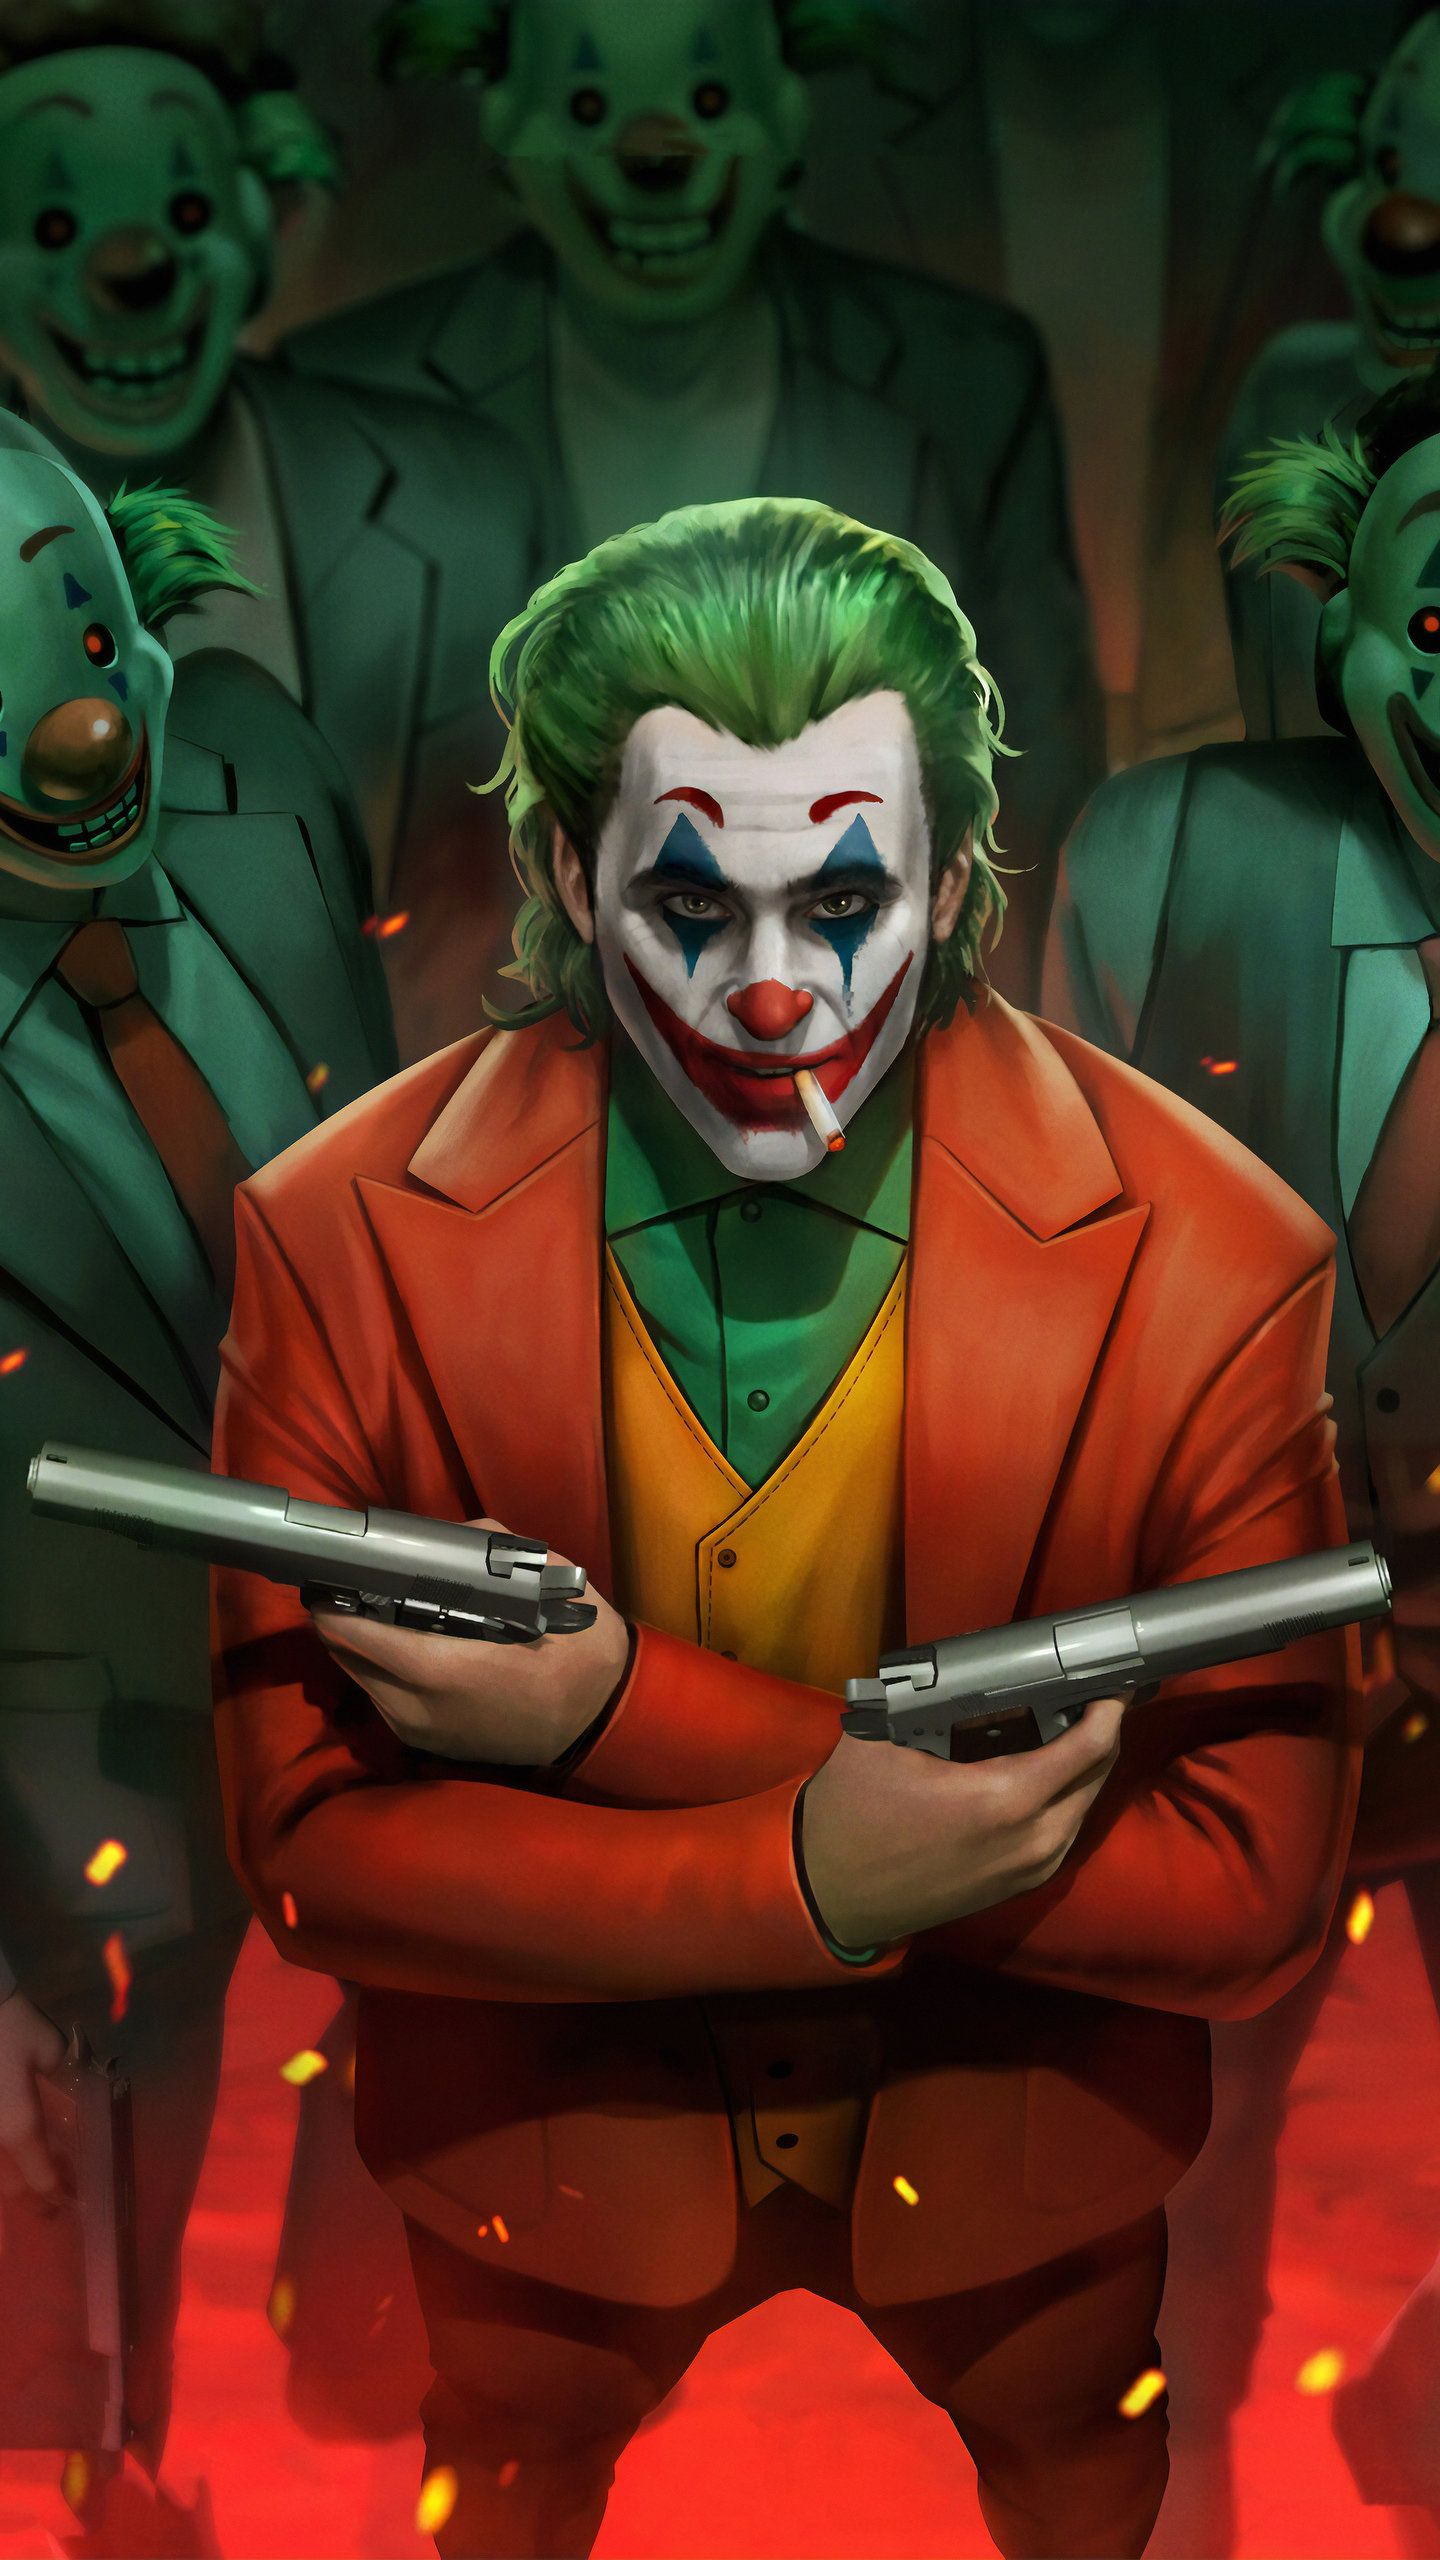 Red Joker Wallpaper 4k This is the great wallpaper of the joker's face with a killing smile and cartoonist touch on this wallpaper. red joker wallpaper 4k